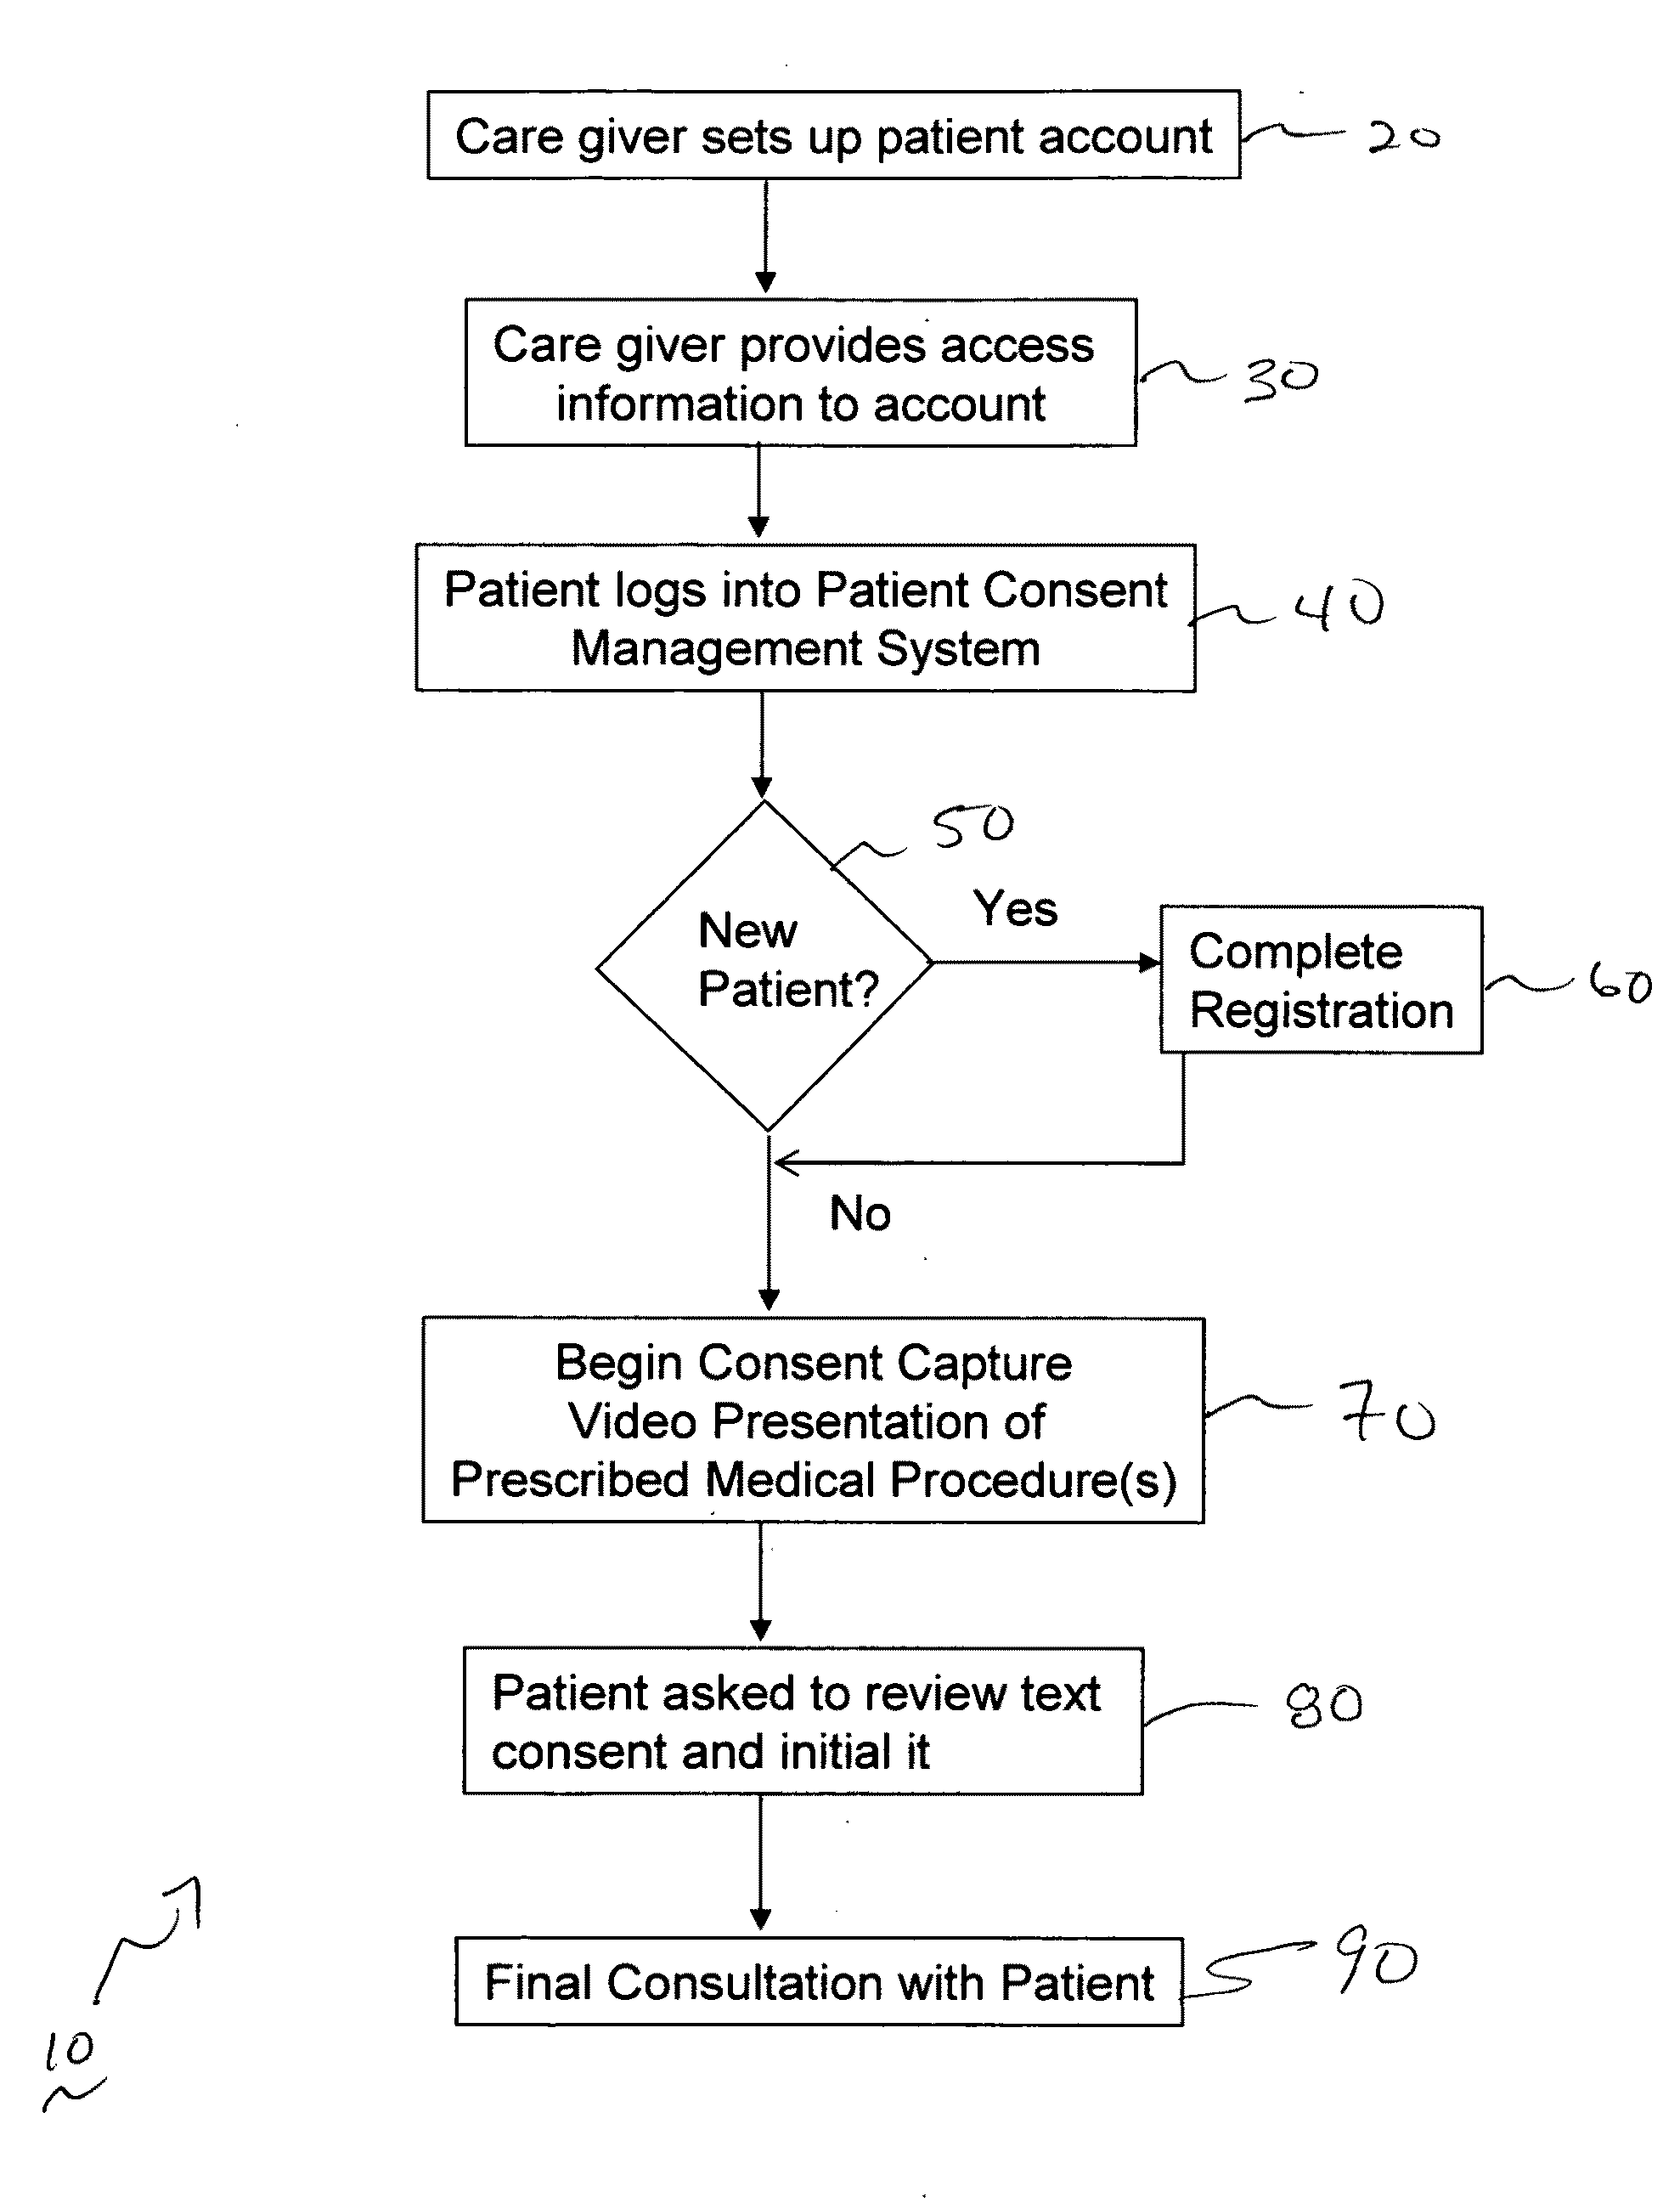 Methods and system for capturing and managing patient consents to prescribed medical procedures